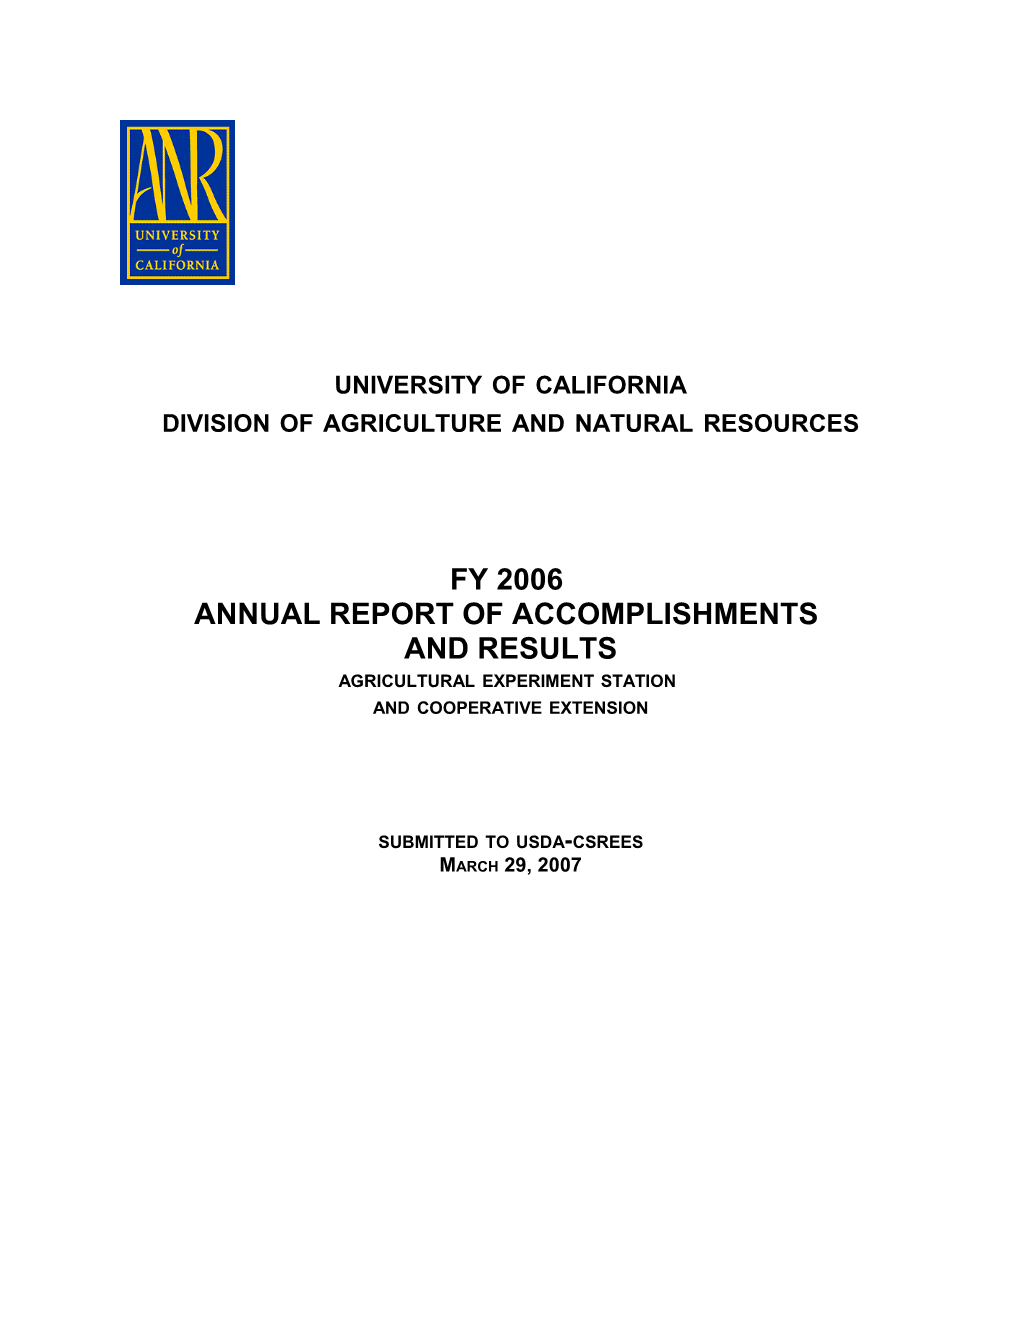 Fy 2006 Annual Report of Accomplishments and Results